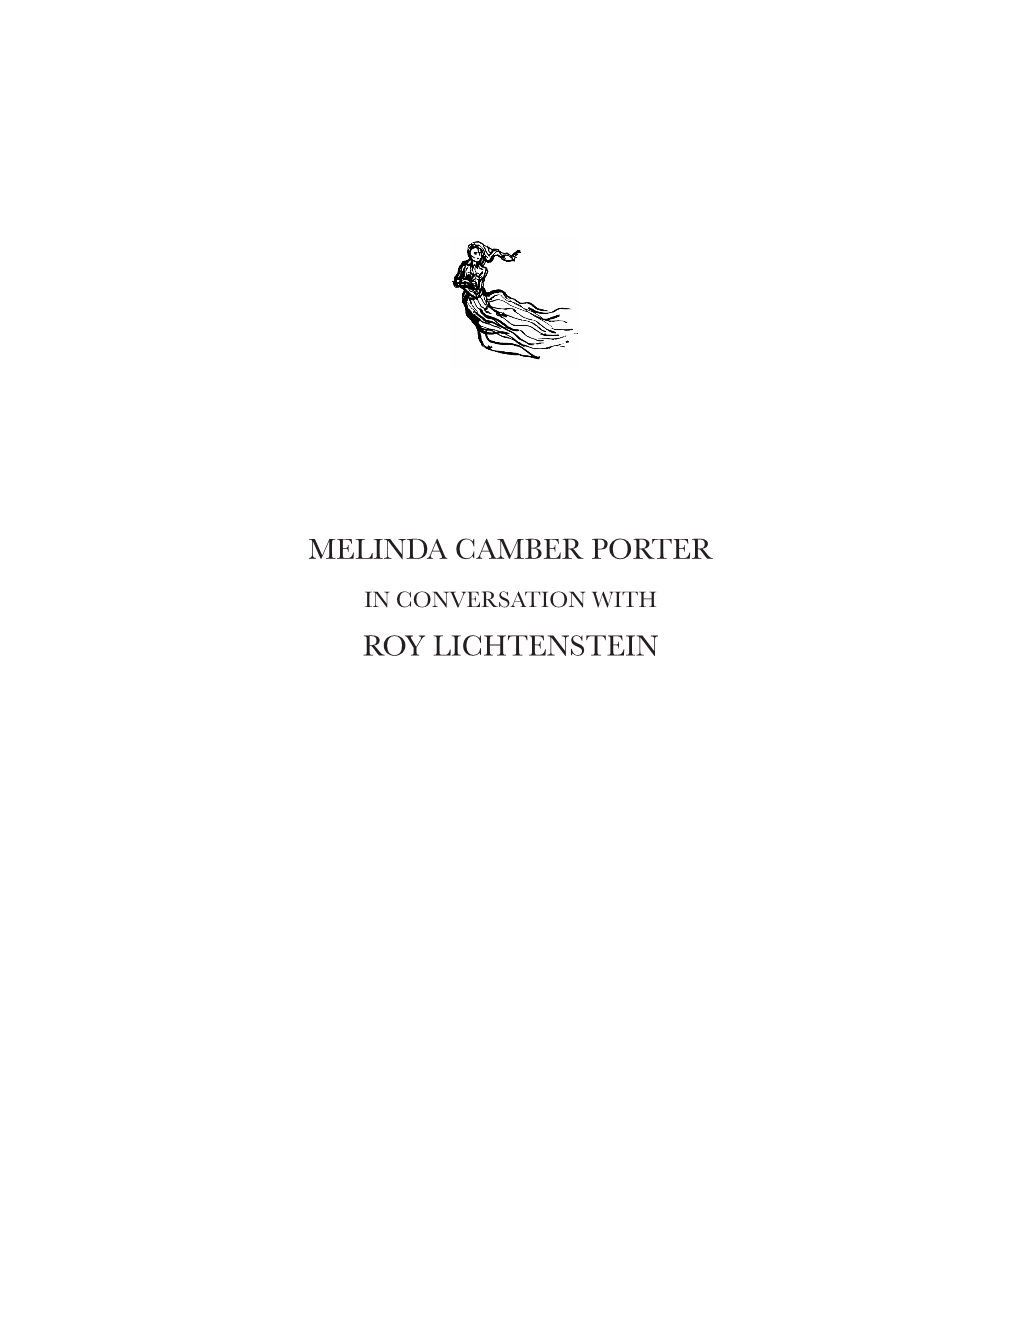 PREVIEW the BOOK Melinda Camber Porter in Conversation With